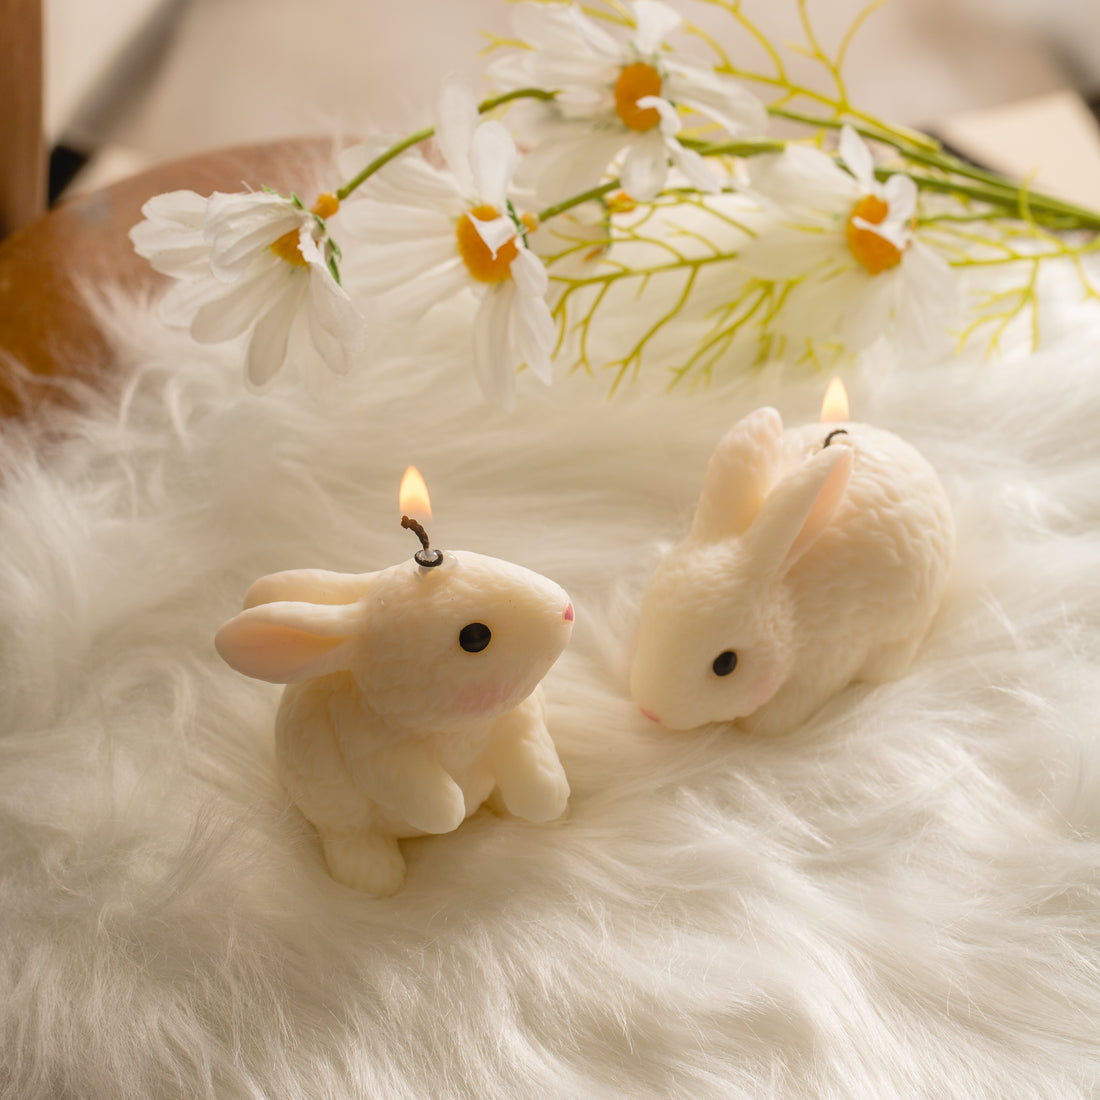 Lighting up blush bunny candle from Southlake Gifts